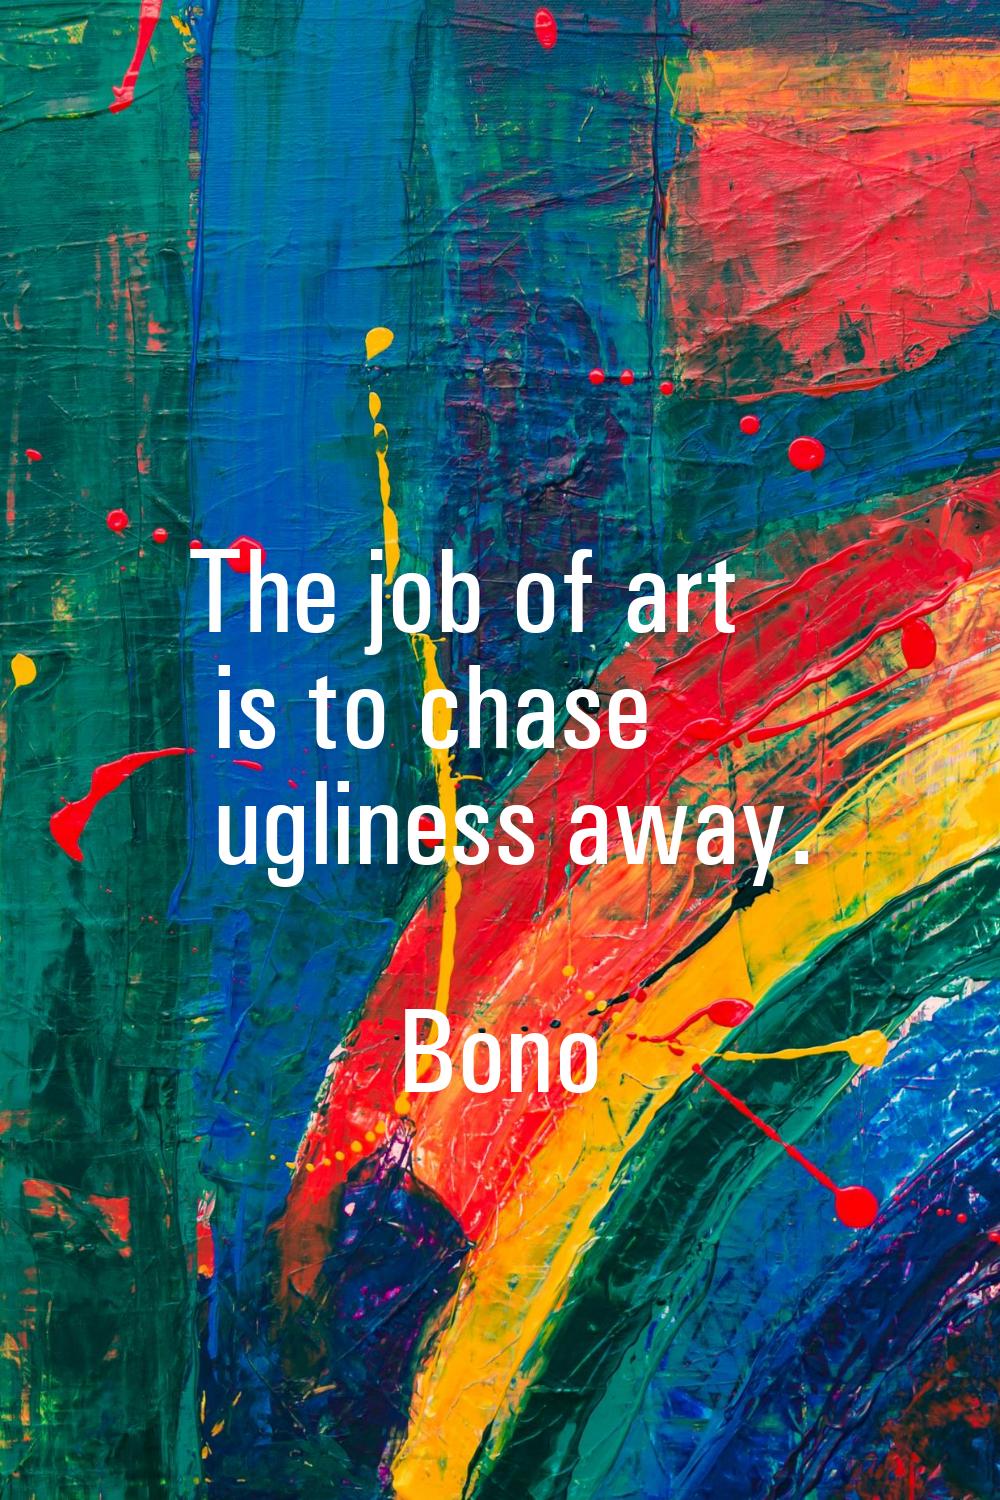 The job of art is to chase ugliness away.